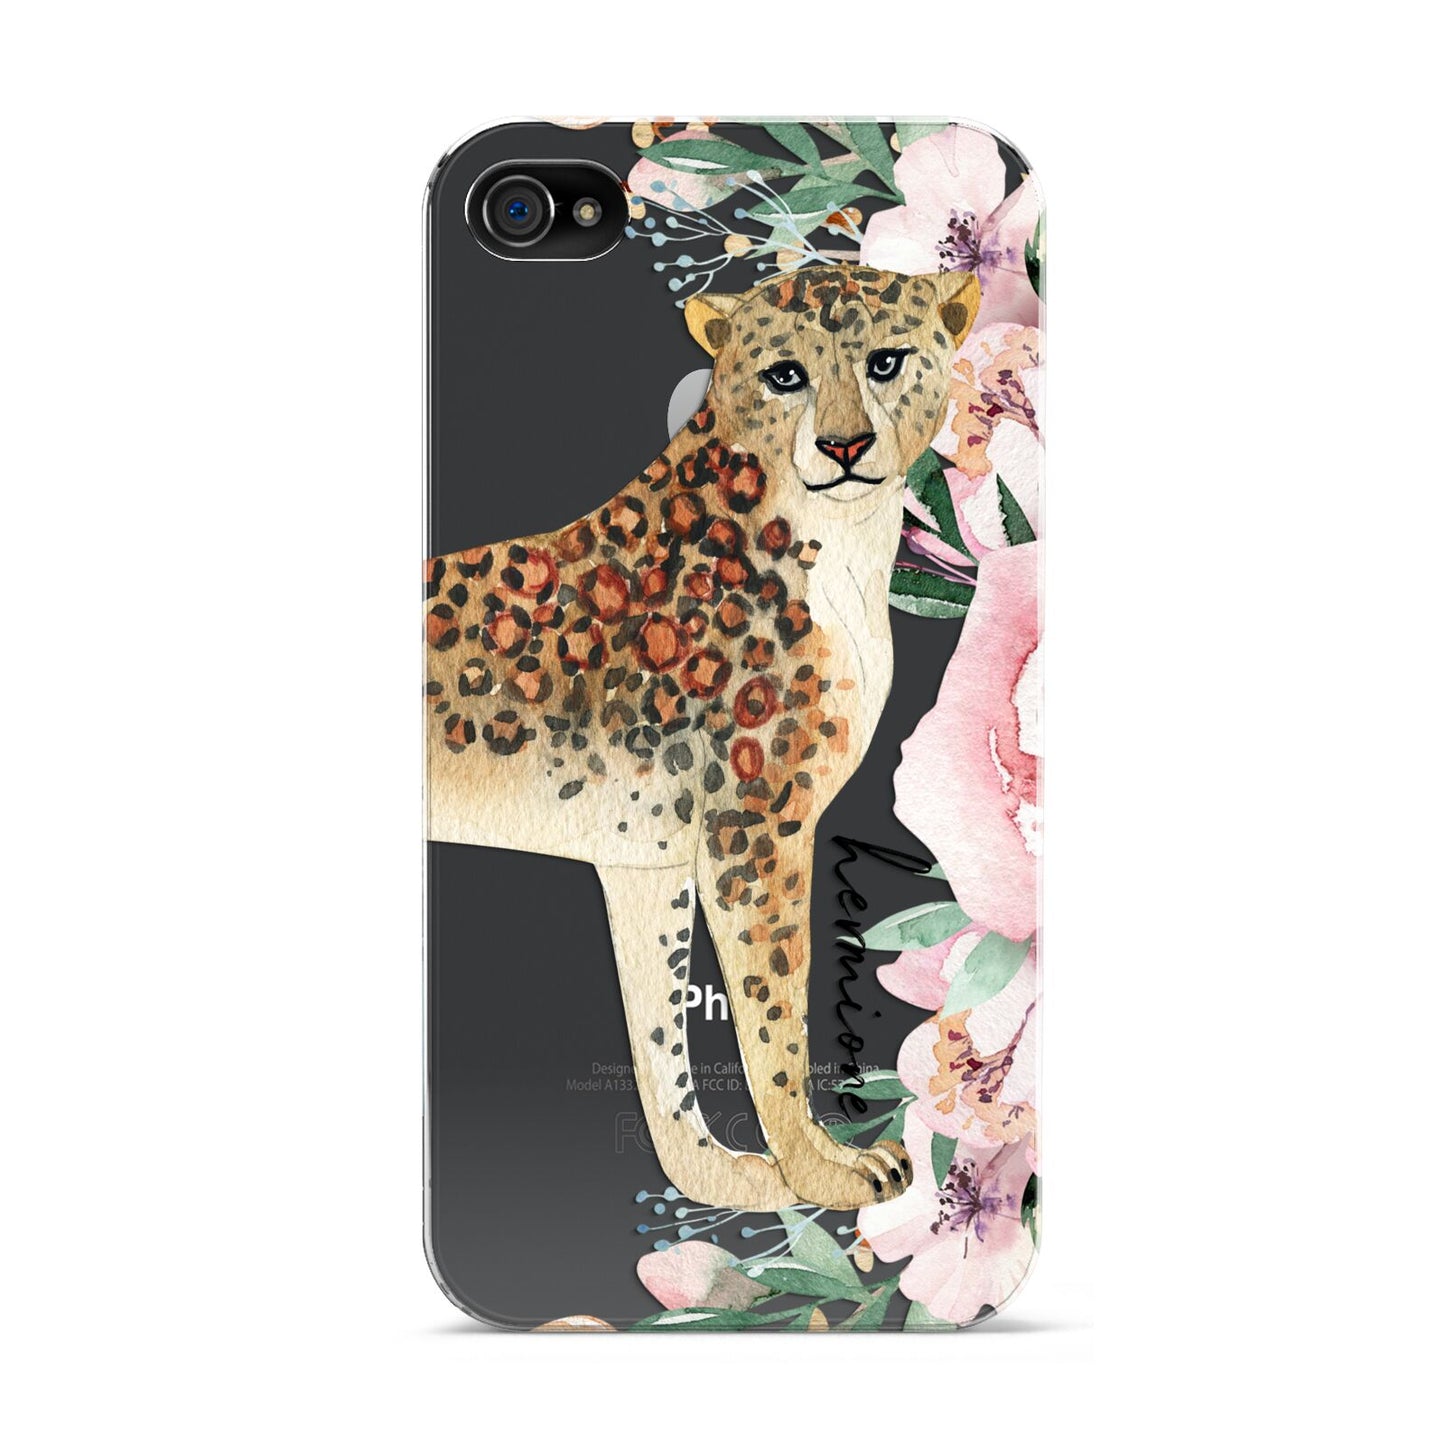 Personalised Leopard Apple iPhone 4s Case